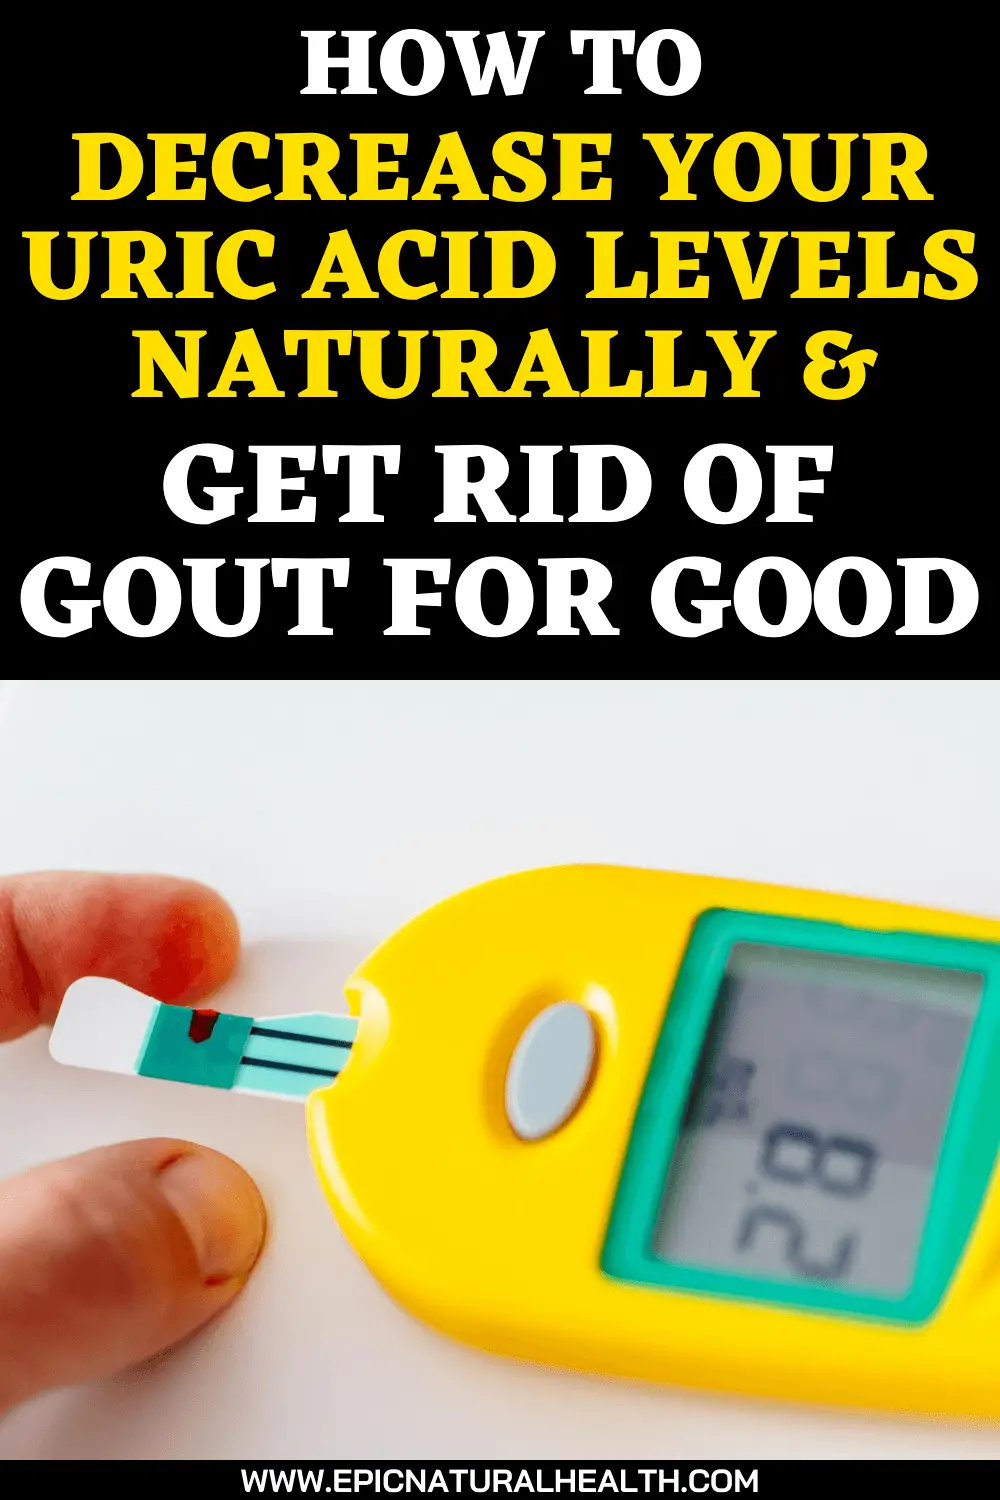 How to decrease your uric acid levels naturally and get rid of gout for good